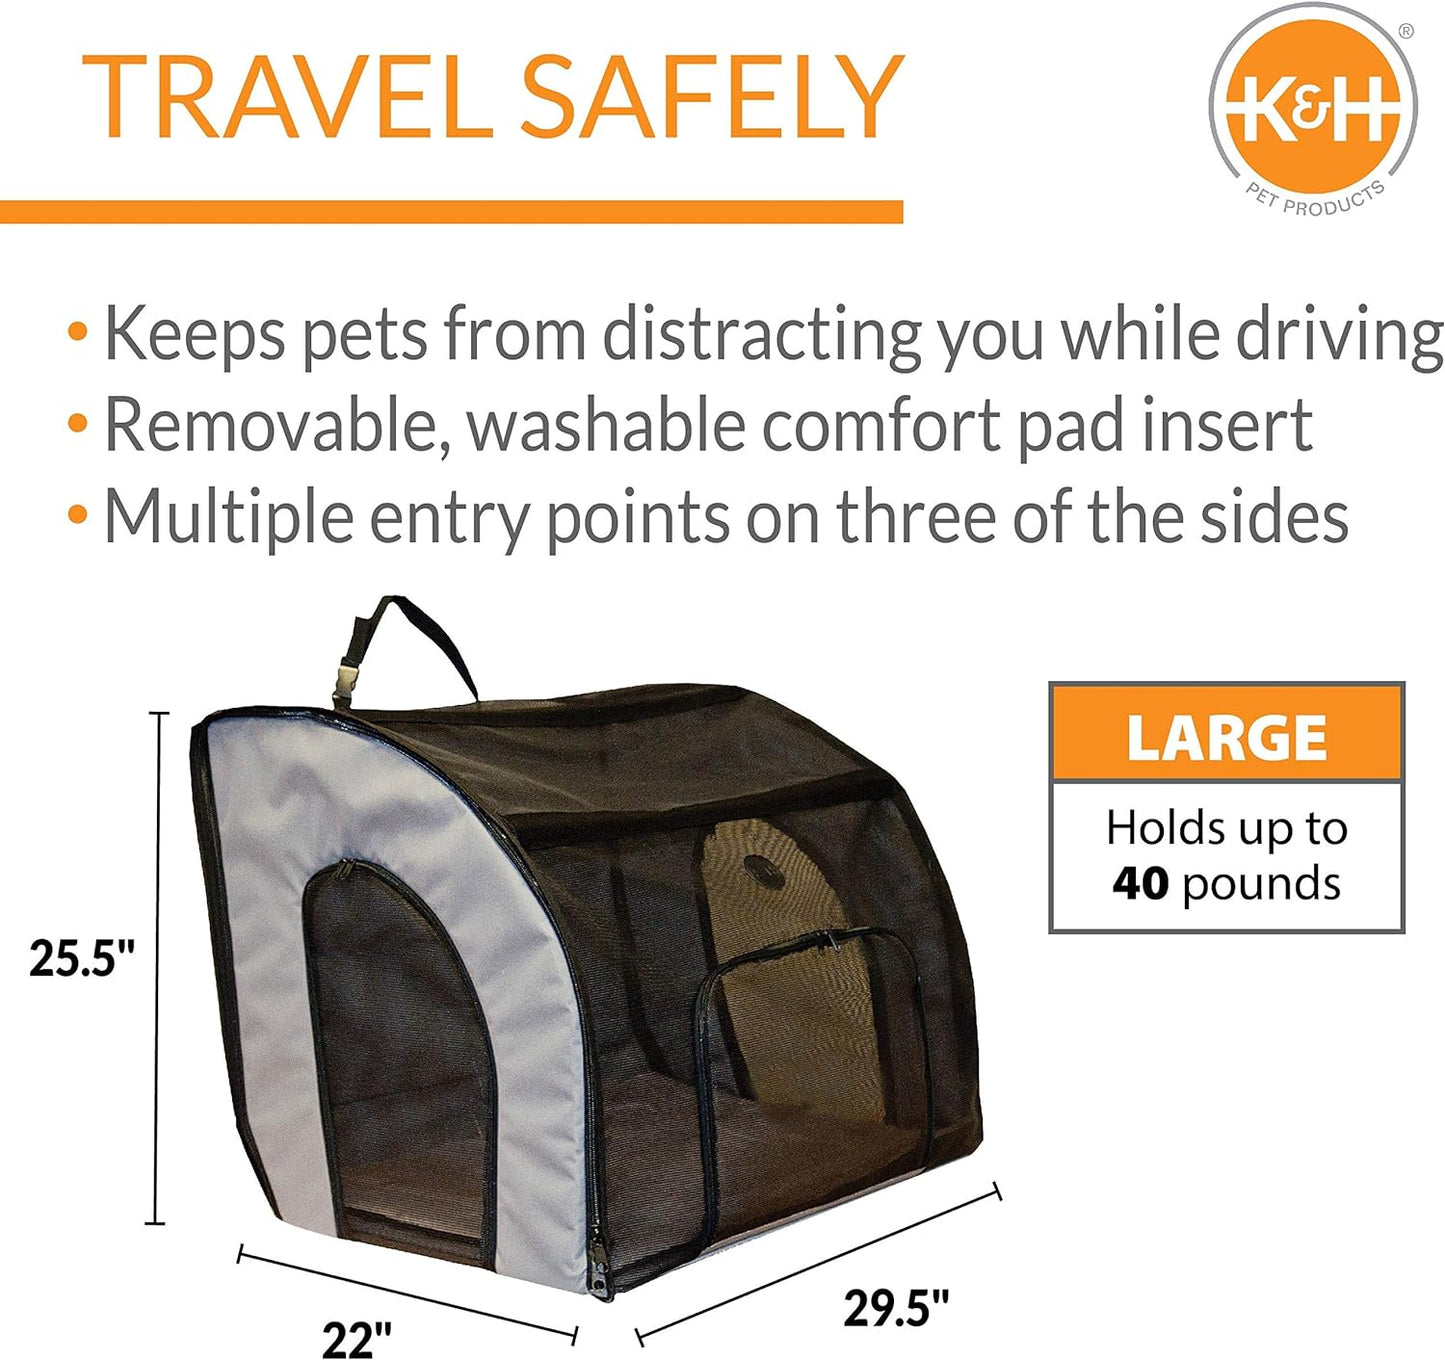 K&H Pet Products Travel Safety Carrier for Pets, Dog Crate for Car Travel, Dog Soft-Sided Carrier for Large Dogs, Portable Car Seat Kennel, Gray\/Black Large 29.5 X 22 X 25.5 Inches